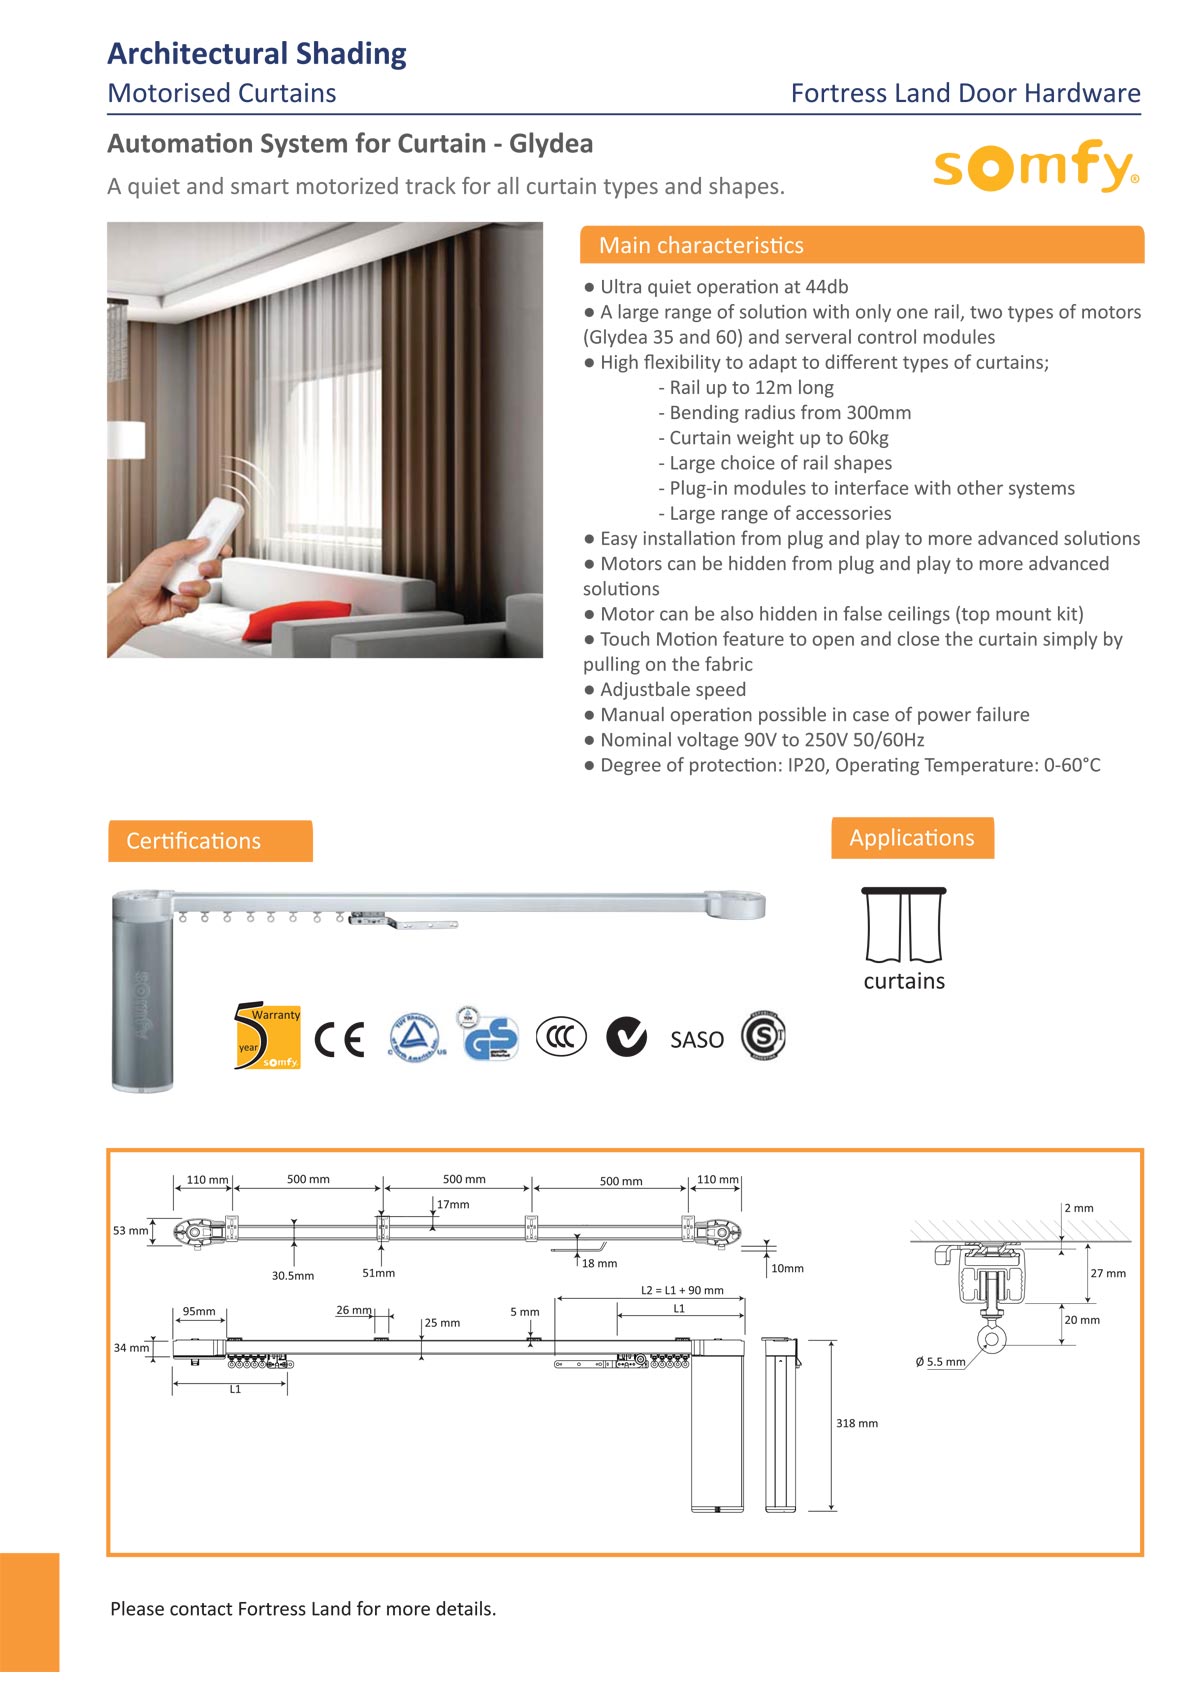 somfy motor, roller blind motor, automatic curtain, porinted roller blind, sunscreen blind motor, remote roller blind, black out roller blind, automatic roller blind, solar control, sun control, windor cover, Fortress Land Security Company Yangon, Myanmar